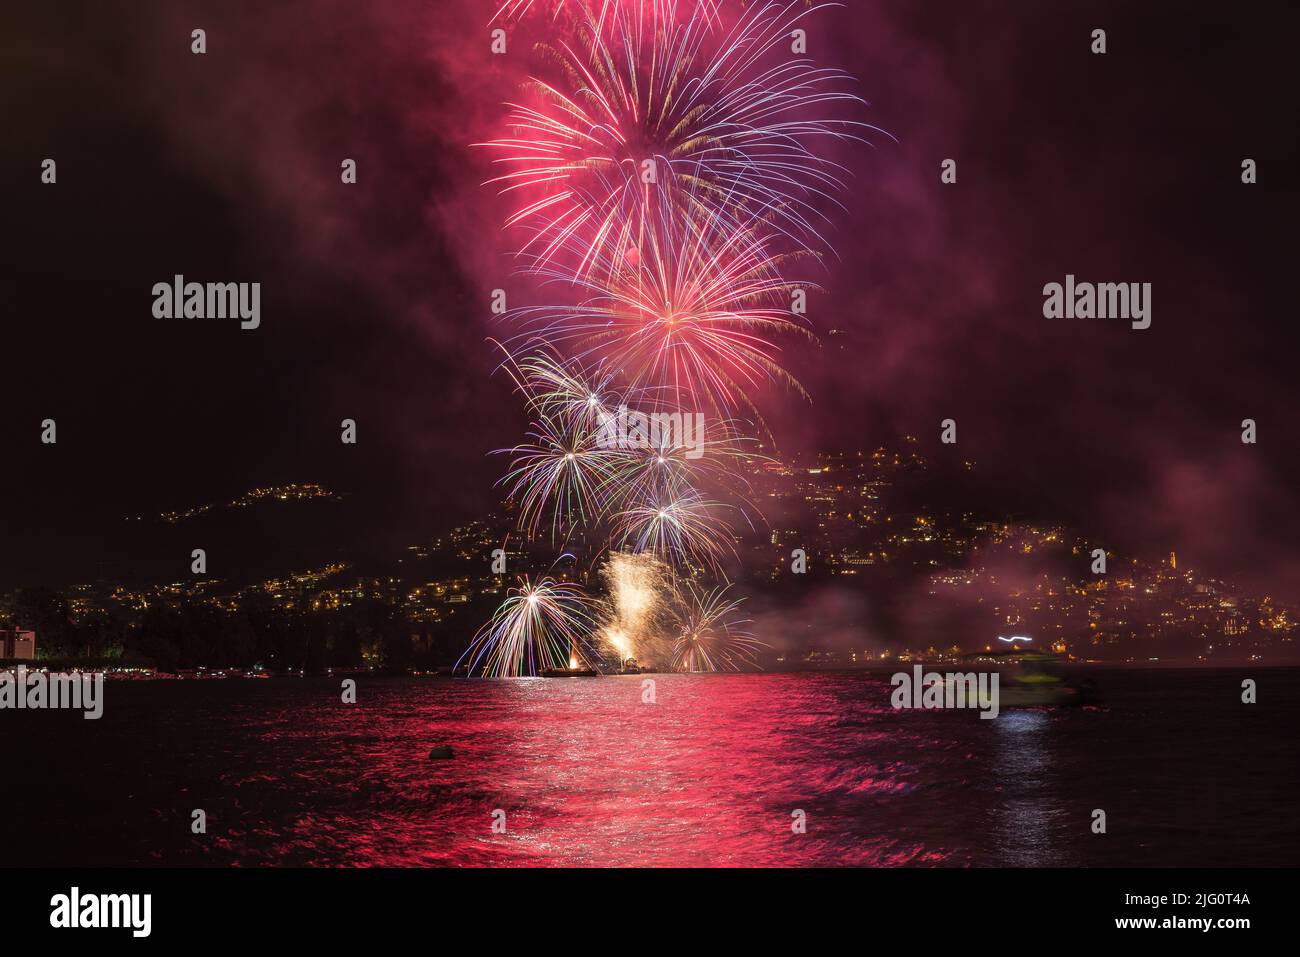 Fireworks at night over the lake. Swiss National Day of August 1st in Lugano city on Lake Lugano with a fireworks display. Tourism and leisure concept Stock Photo